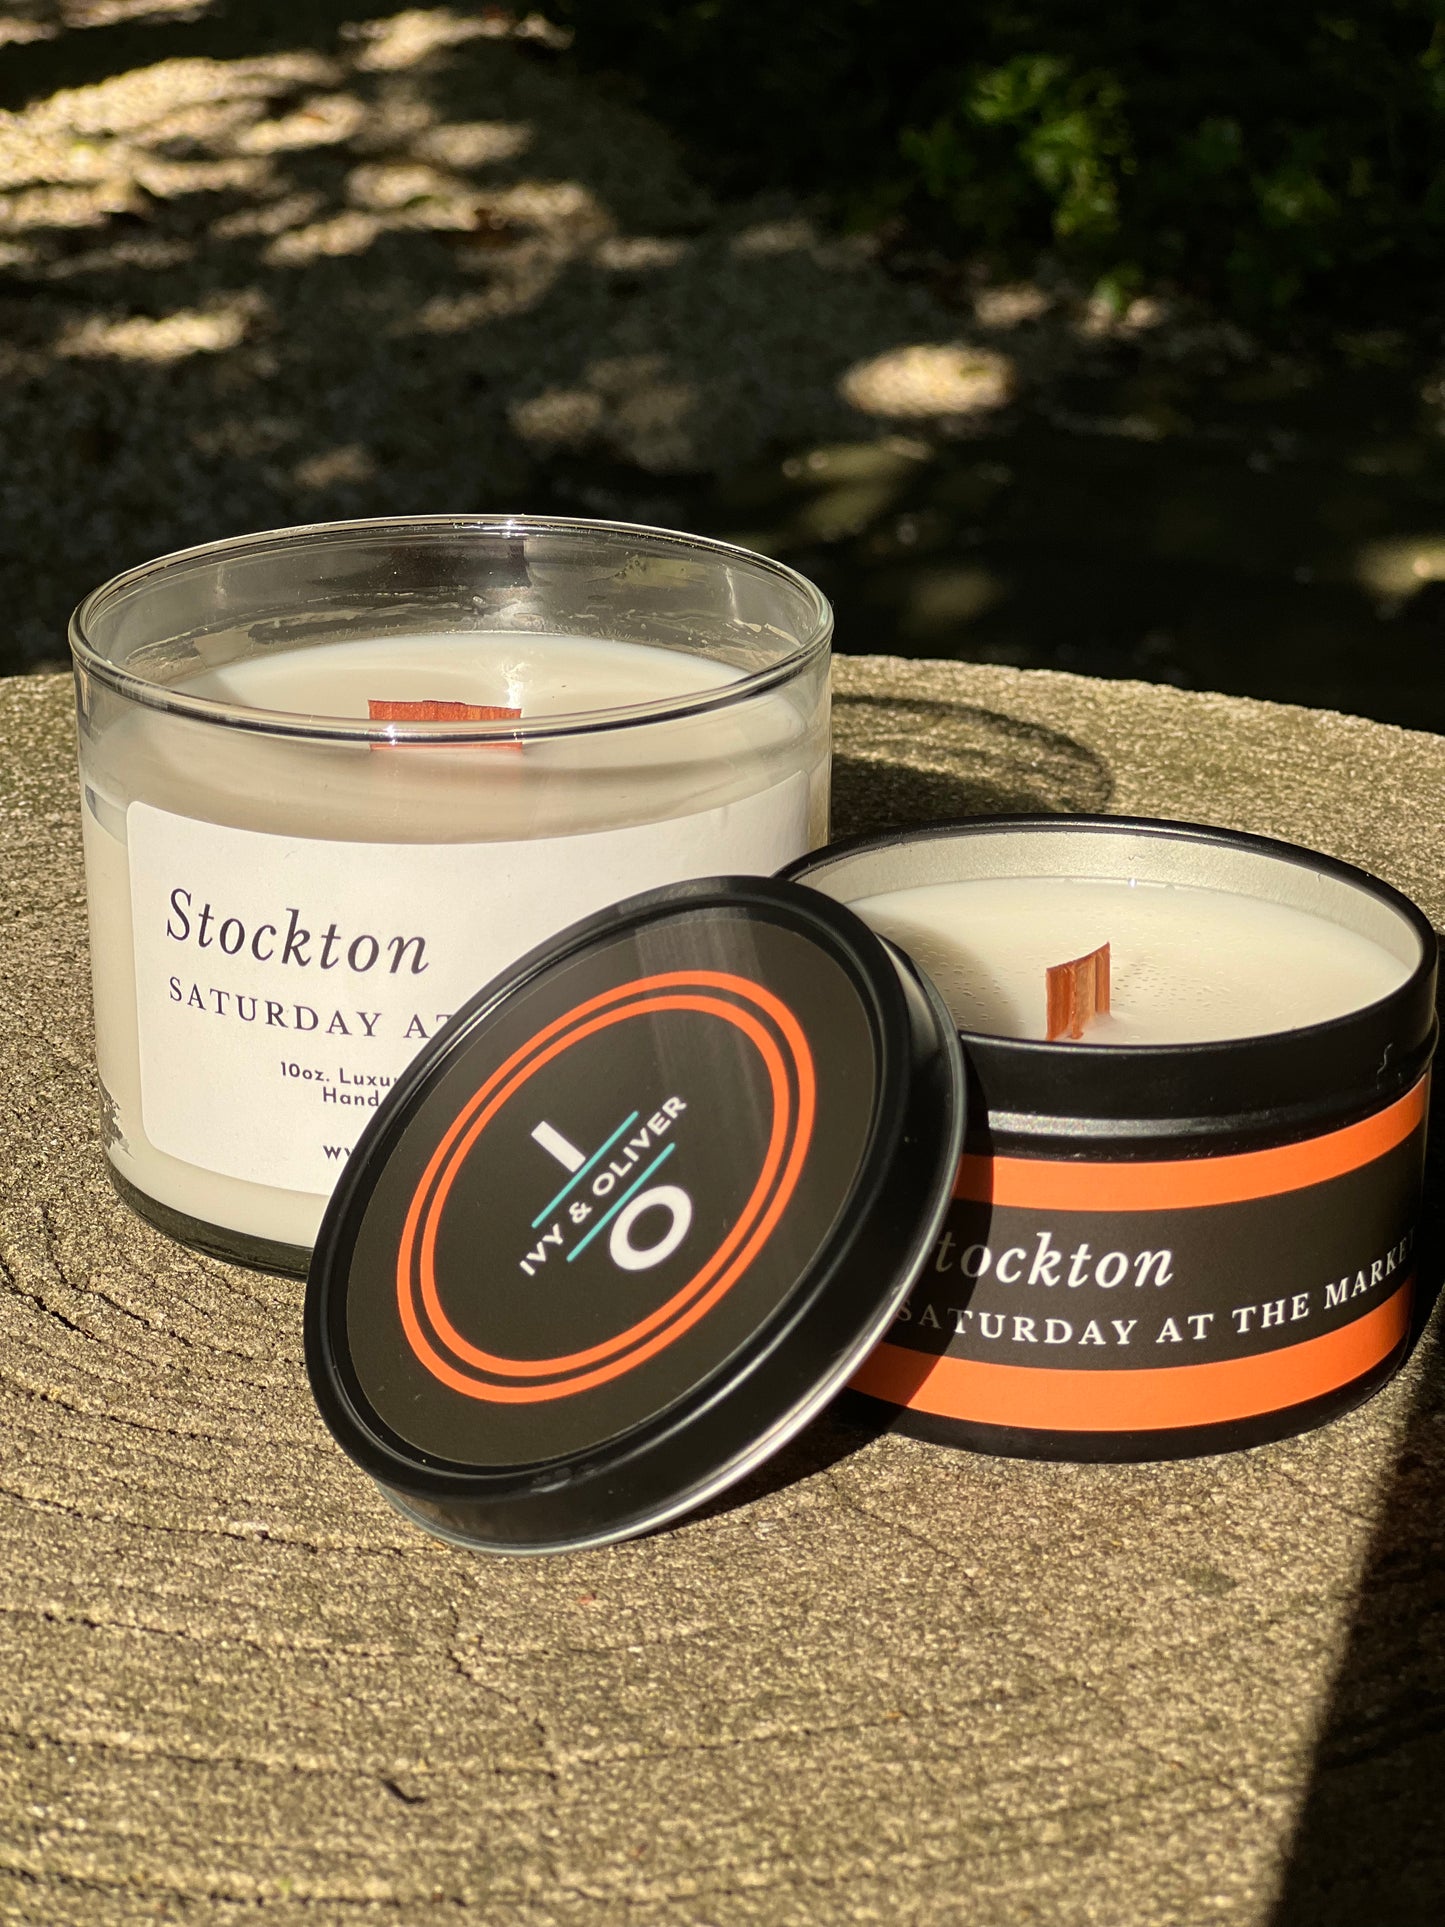 Stockton - Saturday At The Market - Wooden Wick Candle